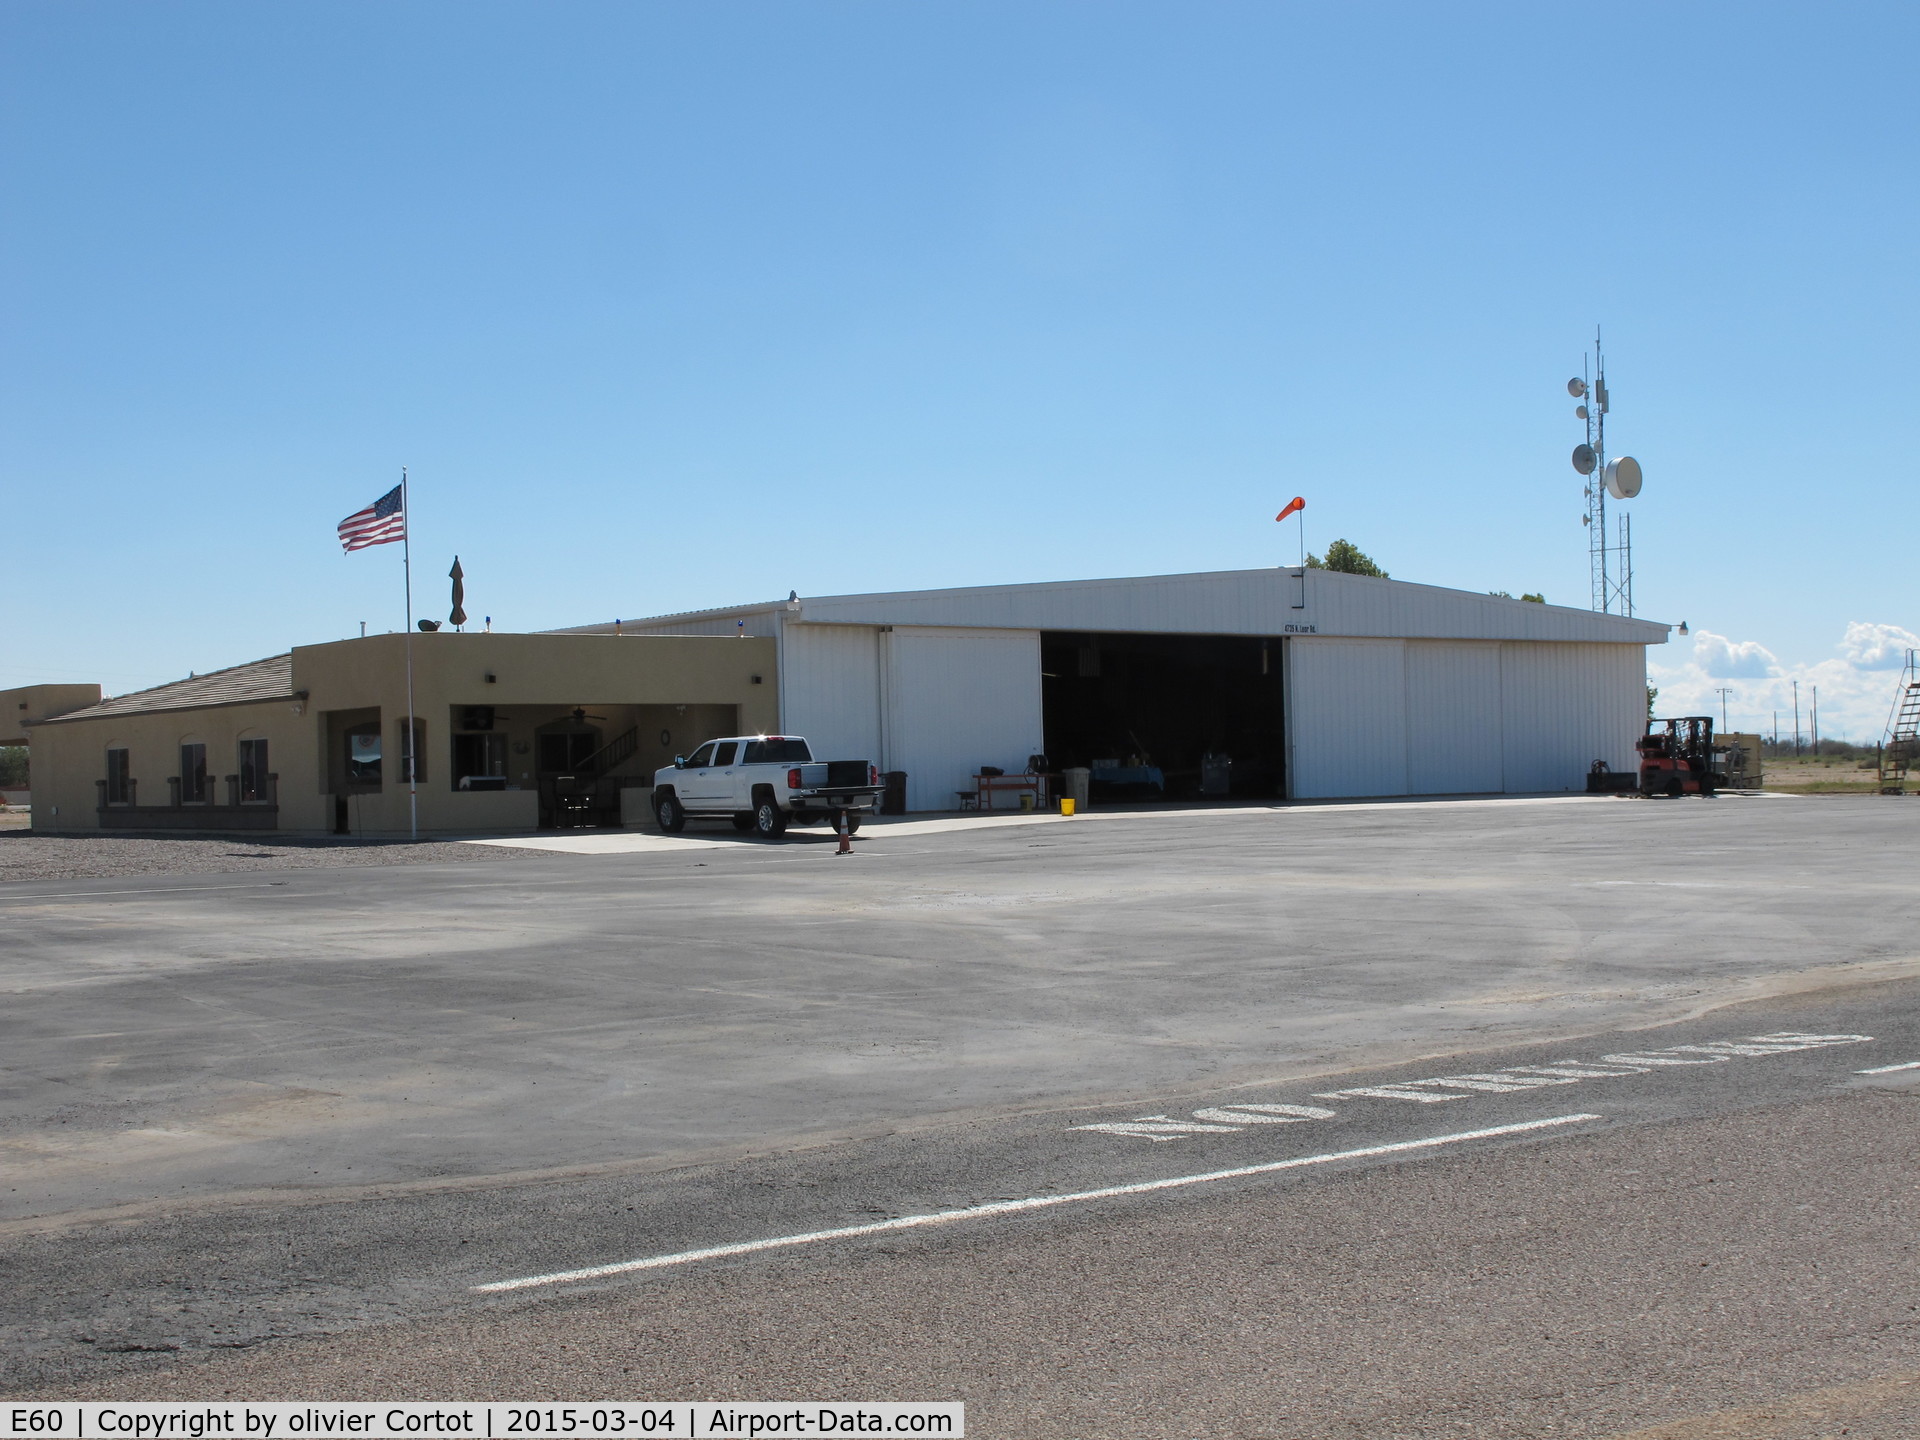 Eloy Municipal Airport (E60) - one of the hangars